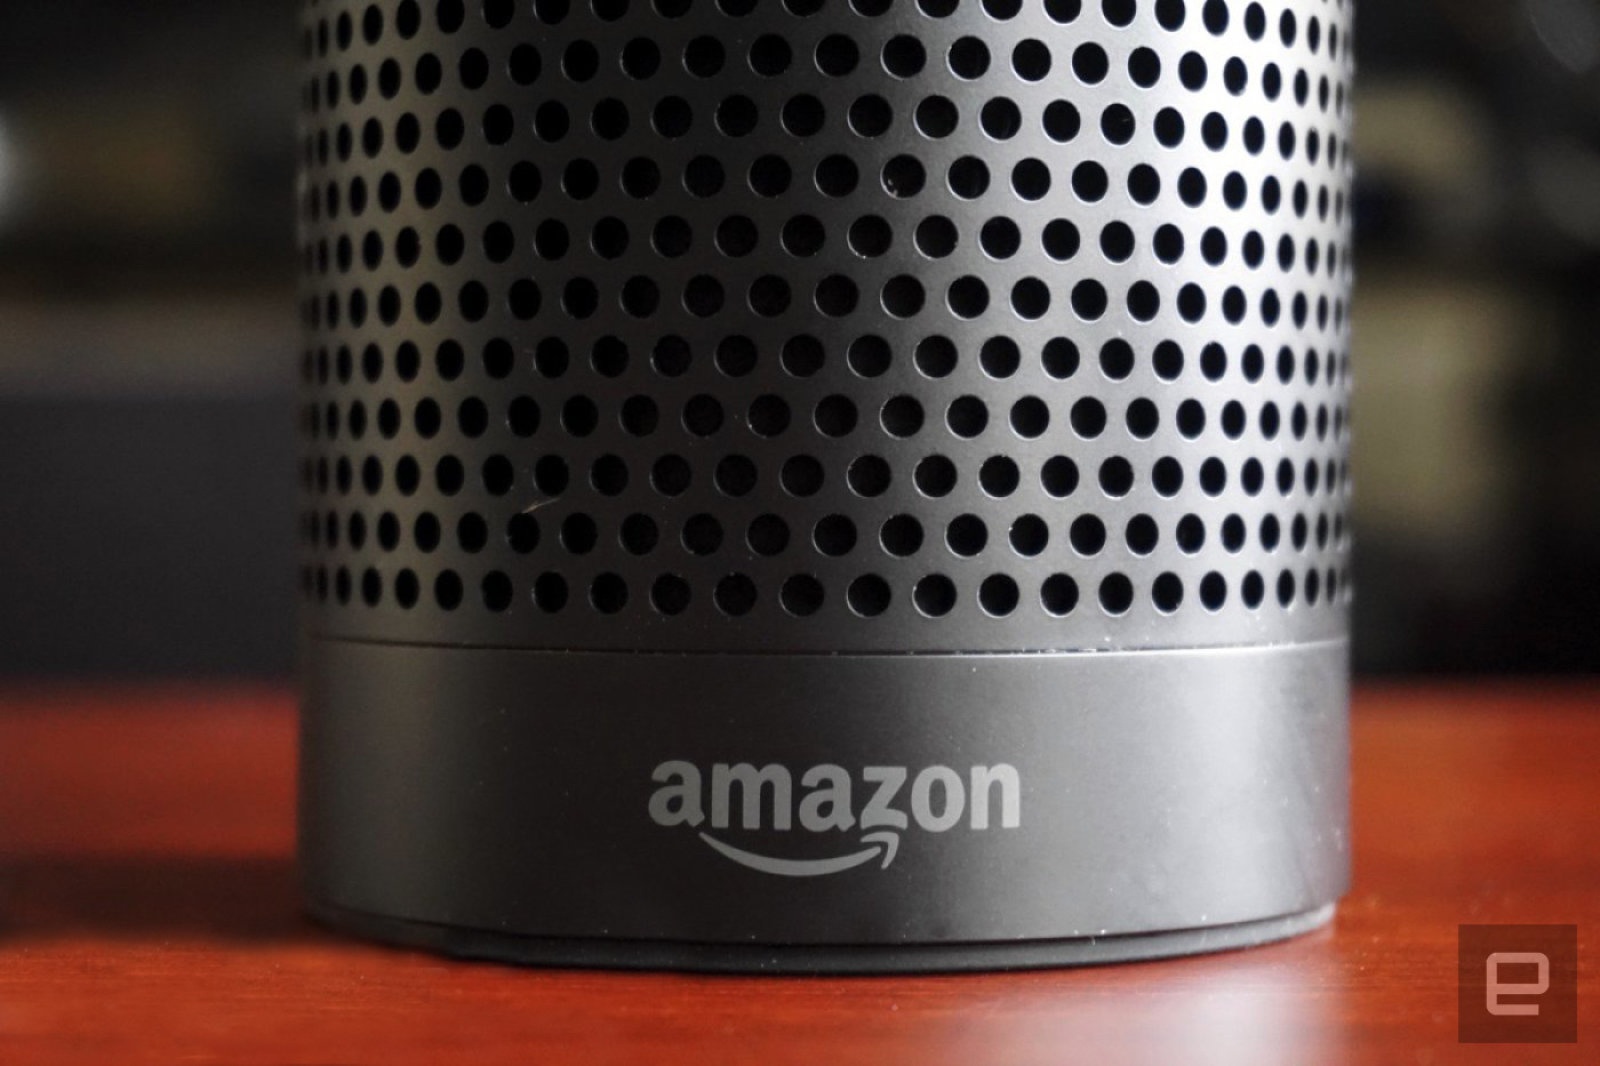 Alexa will help you order gadgets and gear from Best Buy